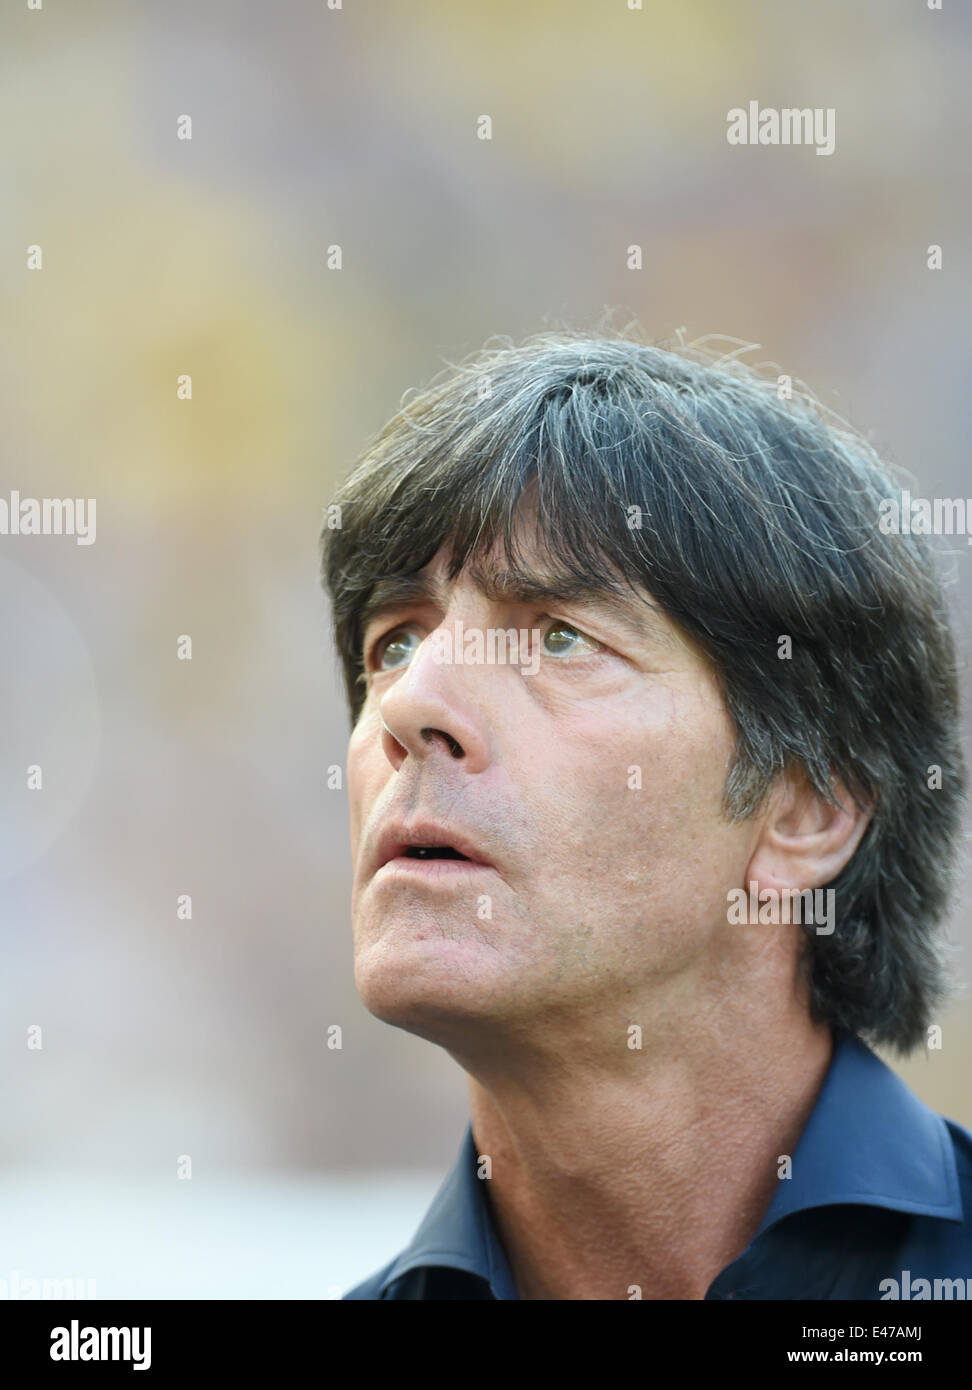 Rio de Janeiro, Brazil. 04th July, 2014. Head coach Joachim Loew of Germany is pictured before the FIFA World Cup 2014 quarter final soccer match between France and Germany at Estadio do Maracana in Rio de Janeiro, Brazil, 04 July 2014. Photo: Andreas Gebert/dpa/Alamy Live News Stock Photo